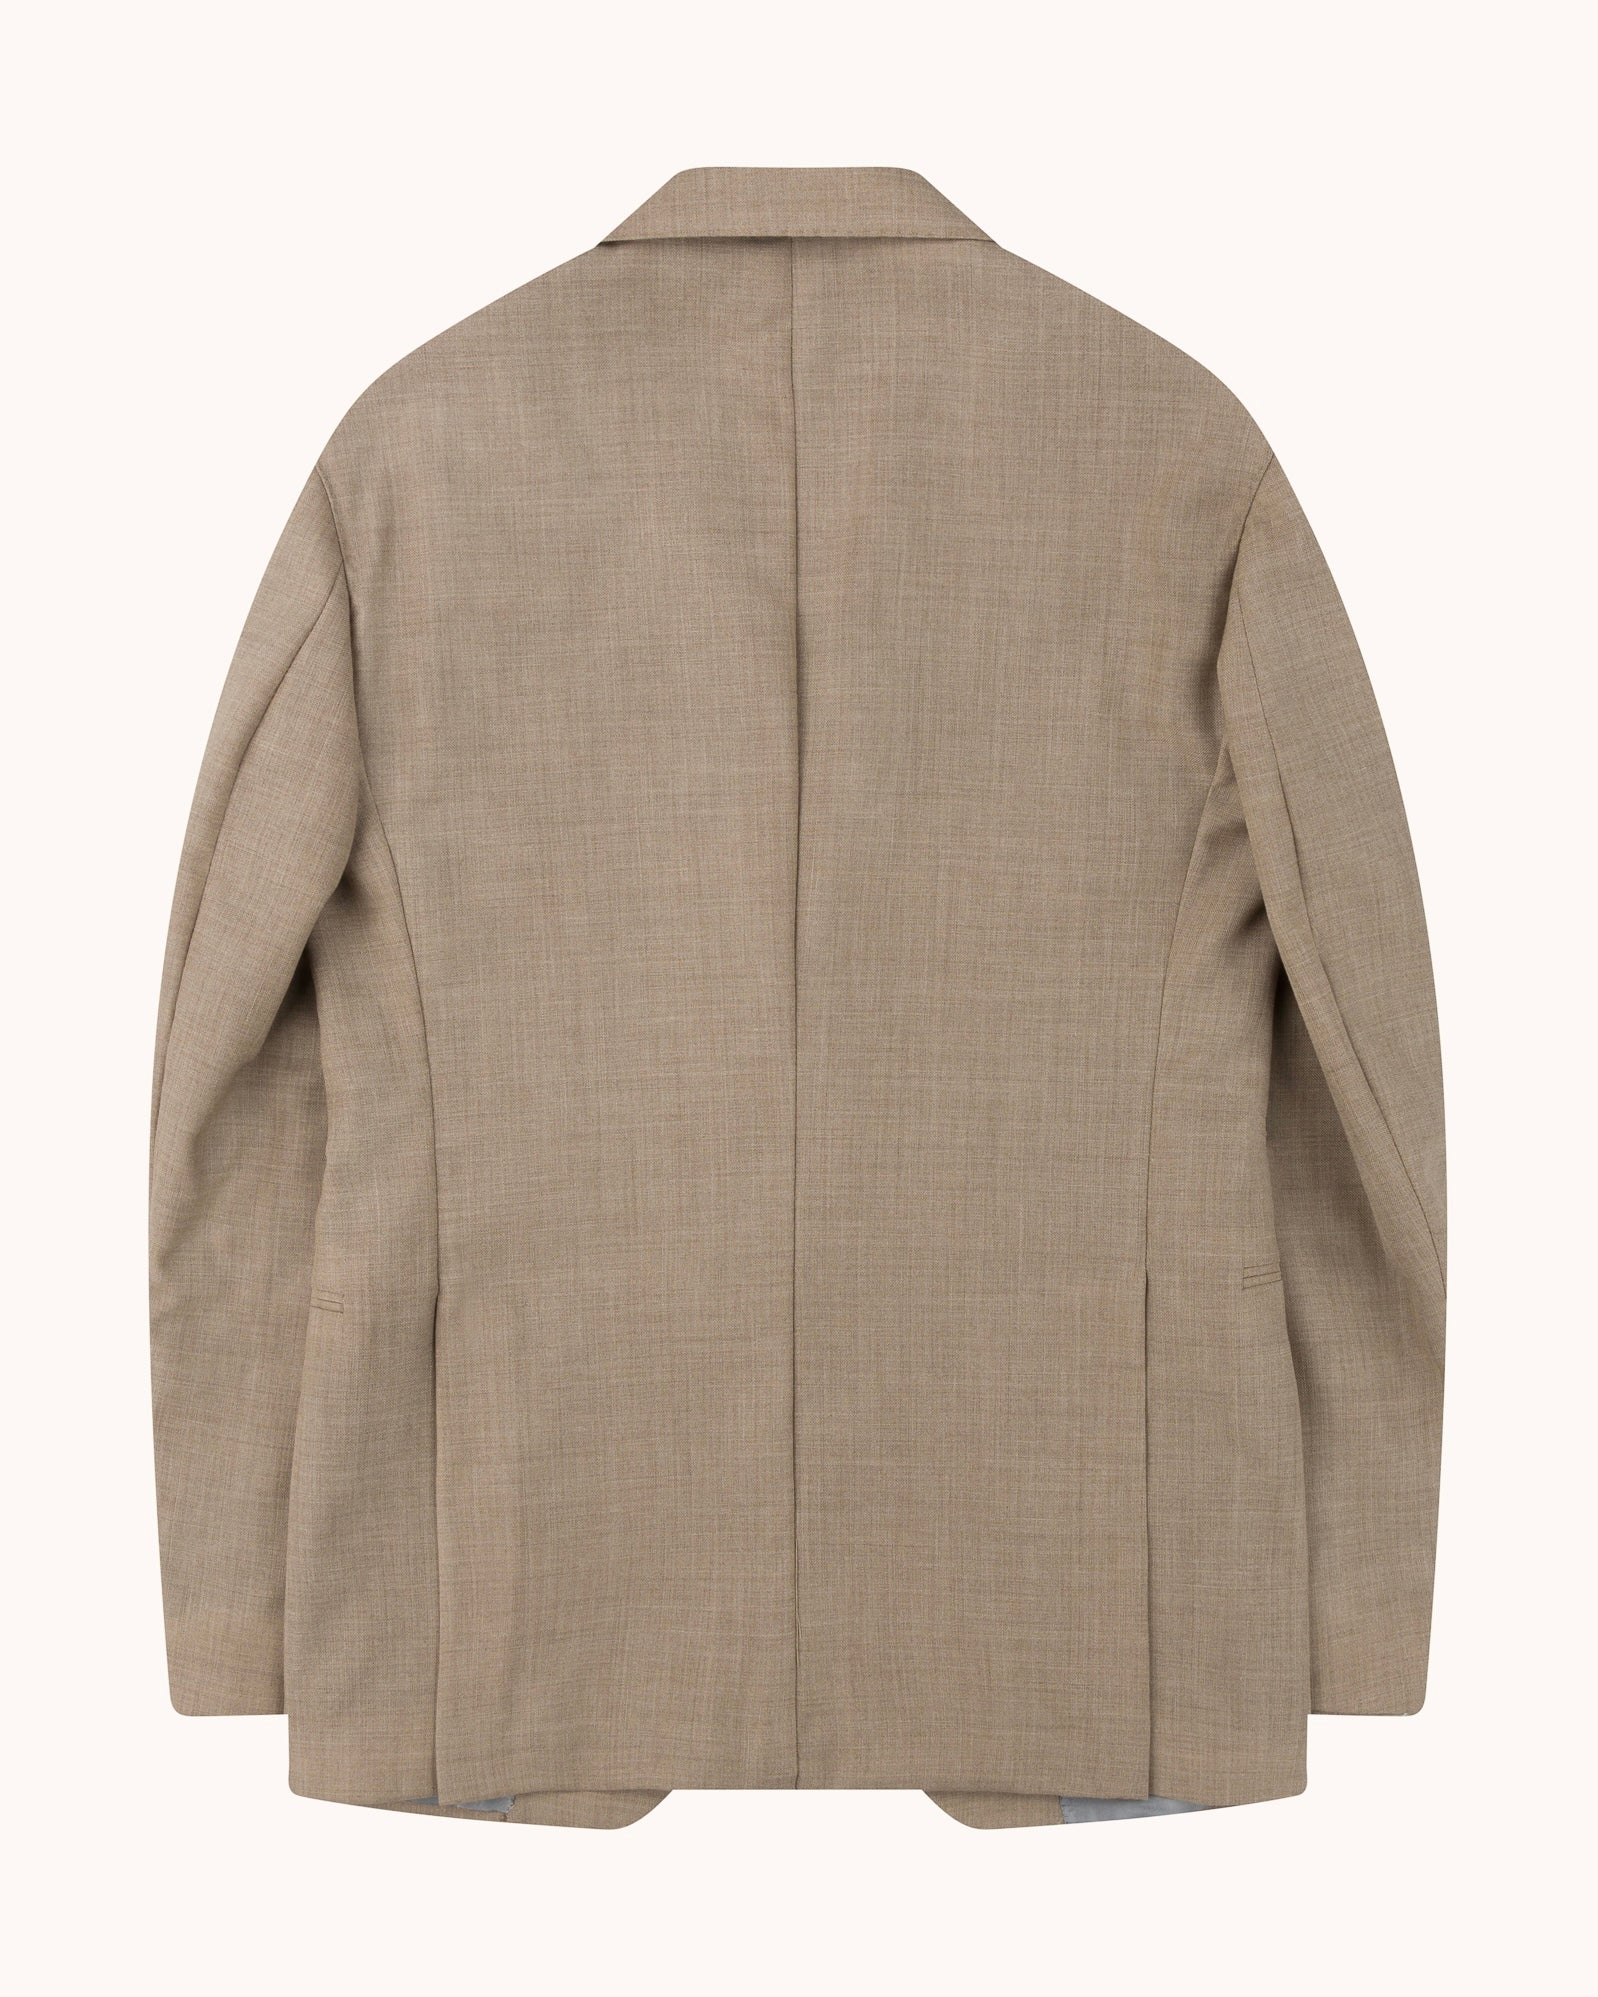 Sport Jacket - Taupe Tropical Wool